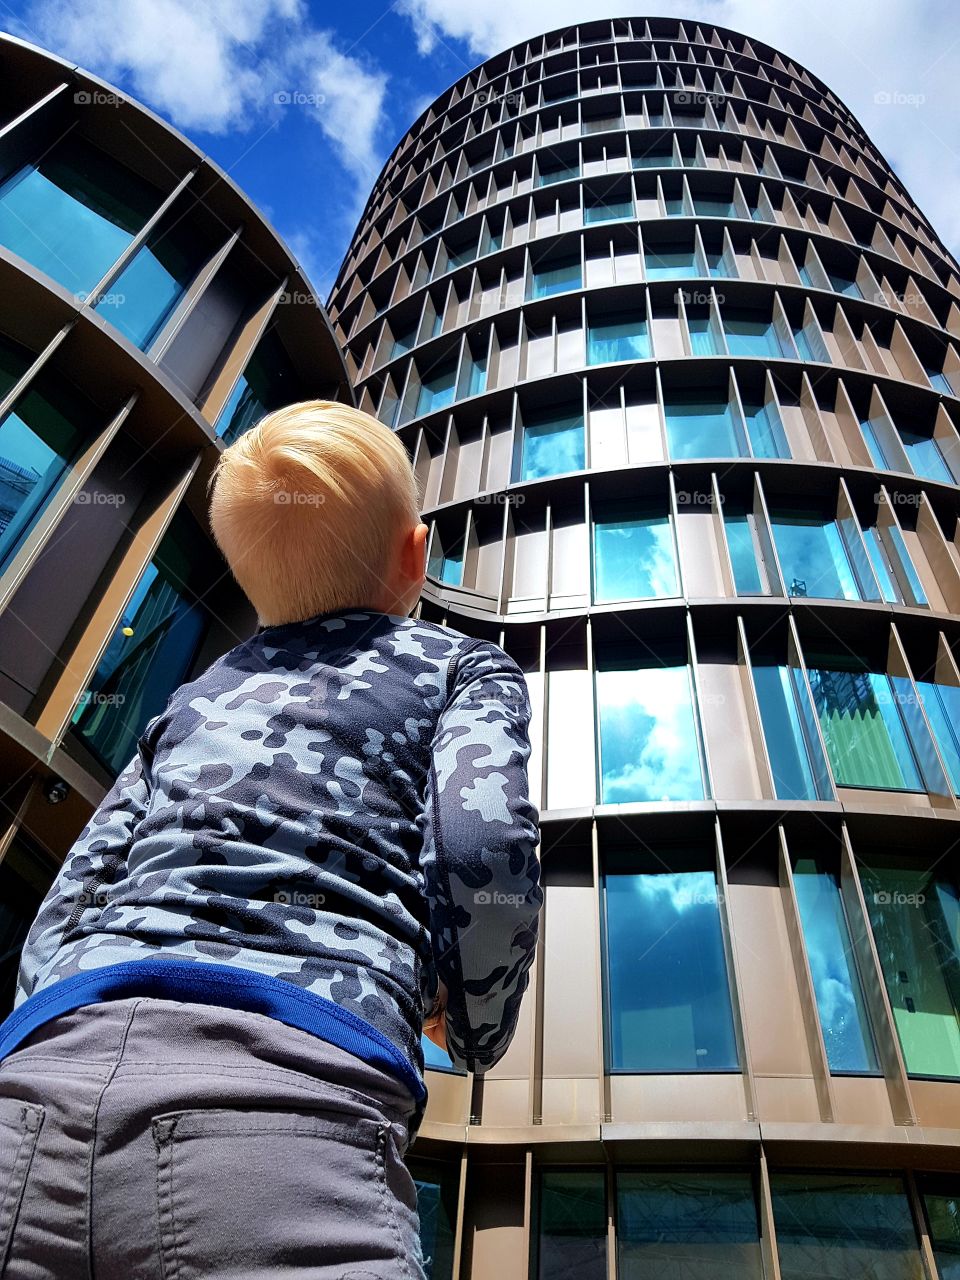 child looking at a skyscraper